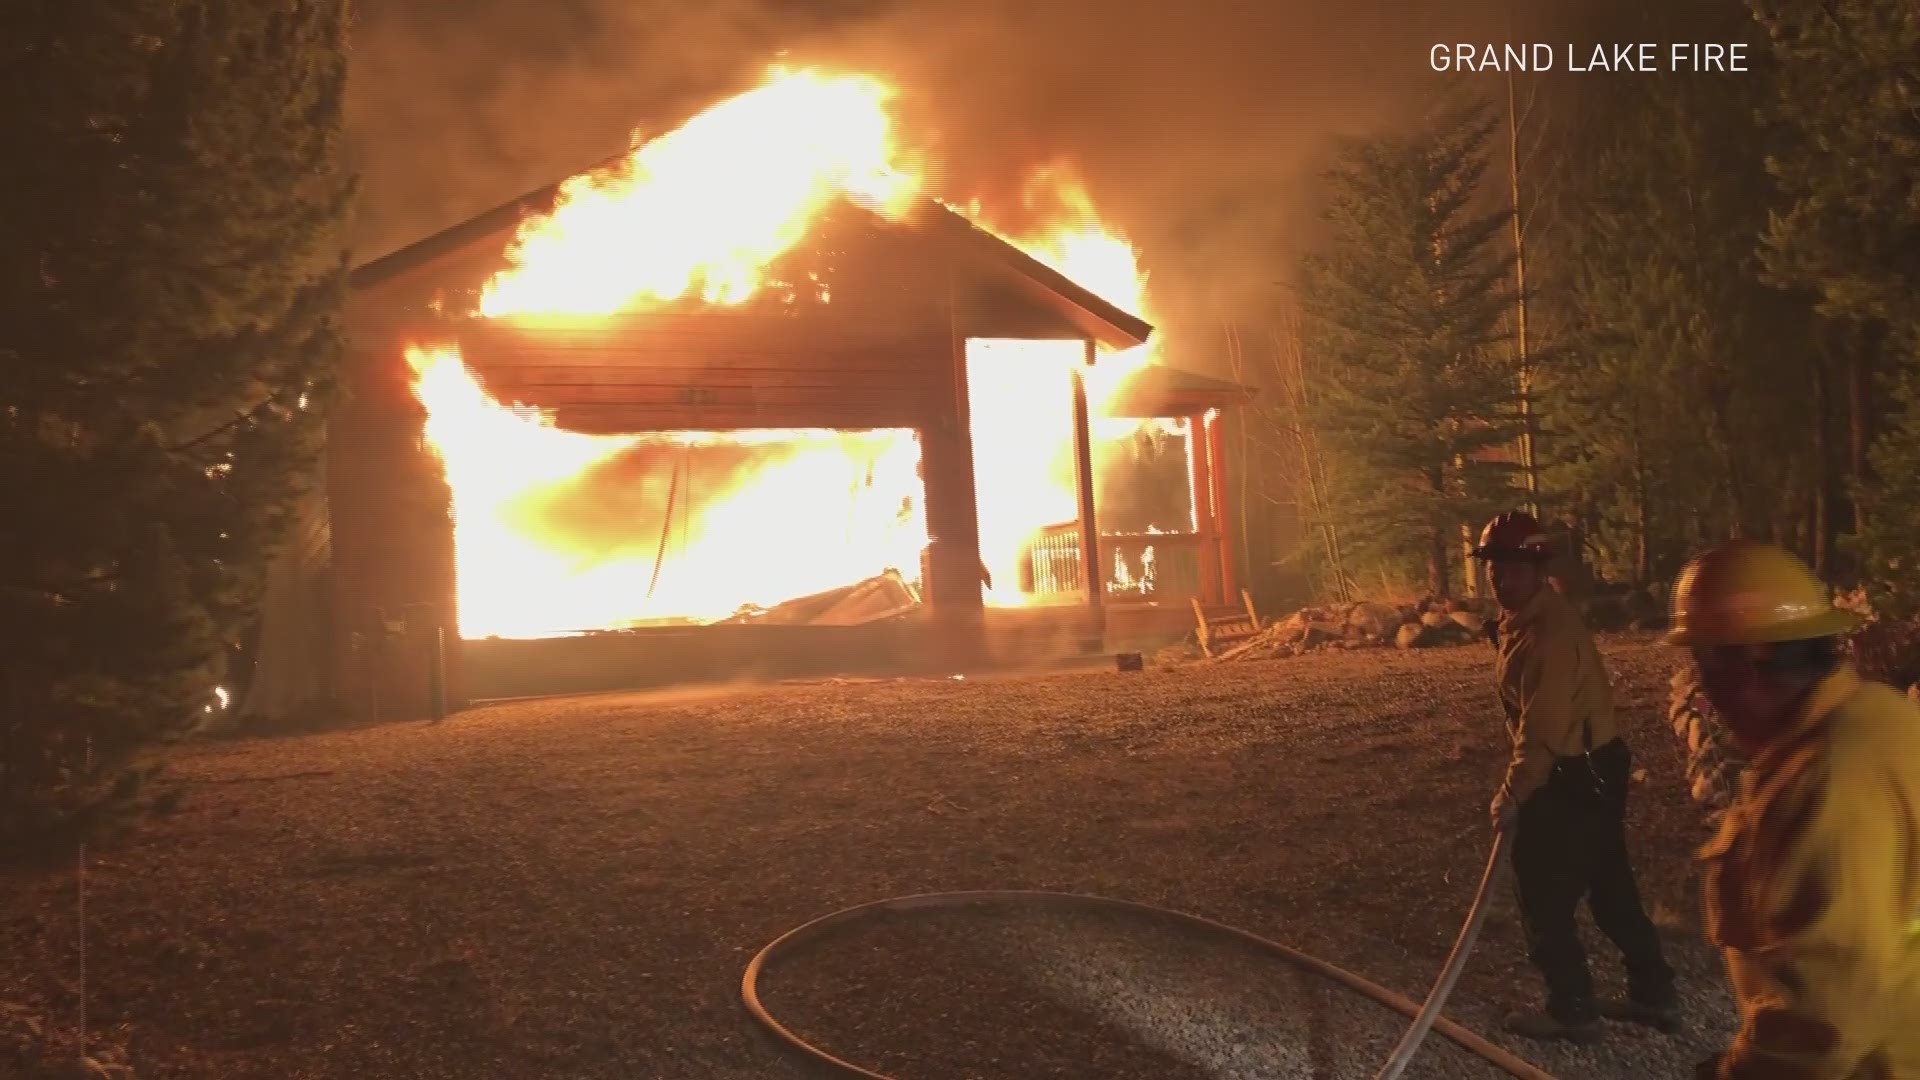 For the firefighters in Grand County, battling the fire also meant fighting to save their town.